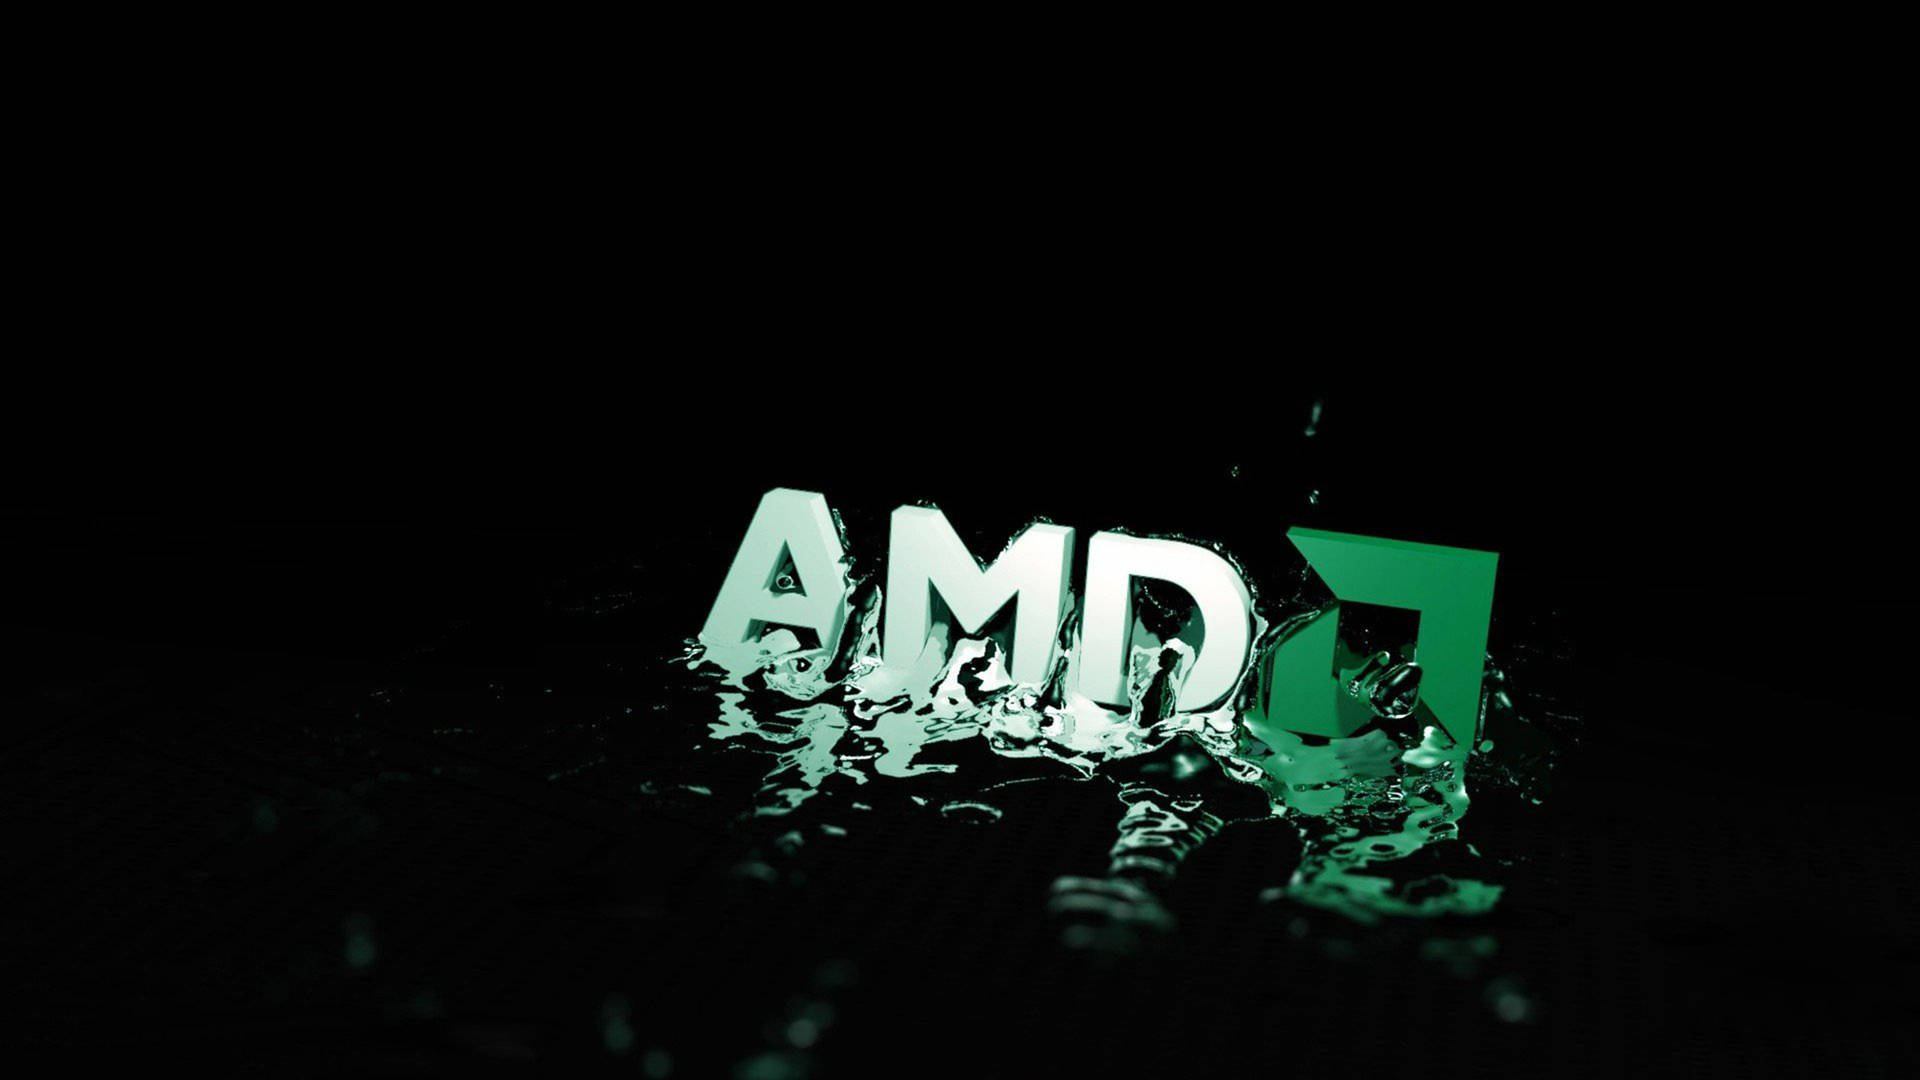 Amd Logo With Water